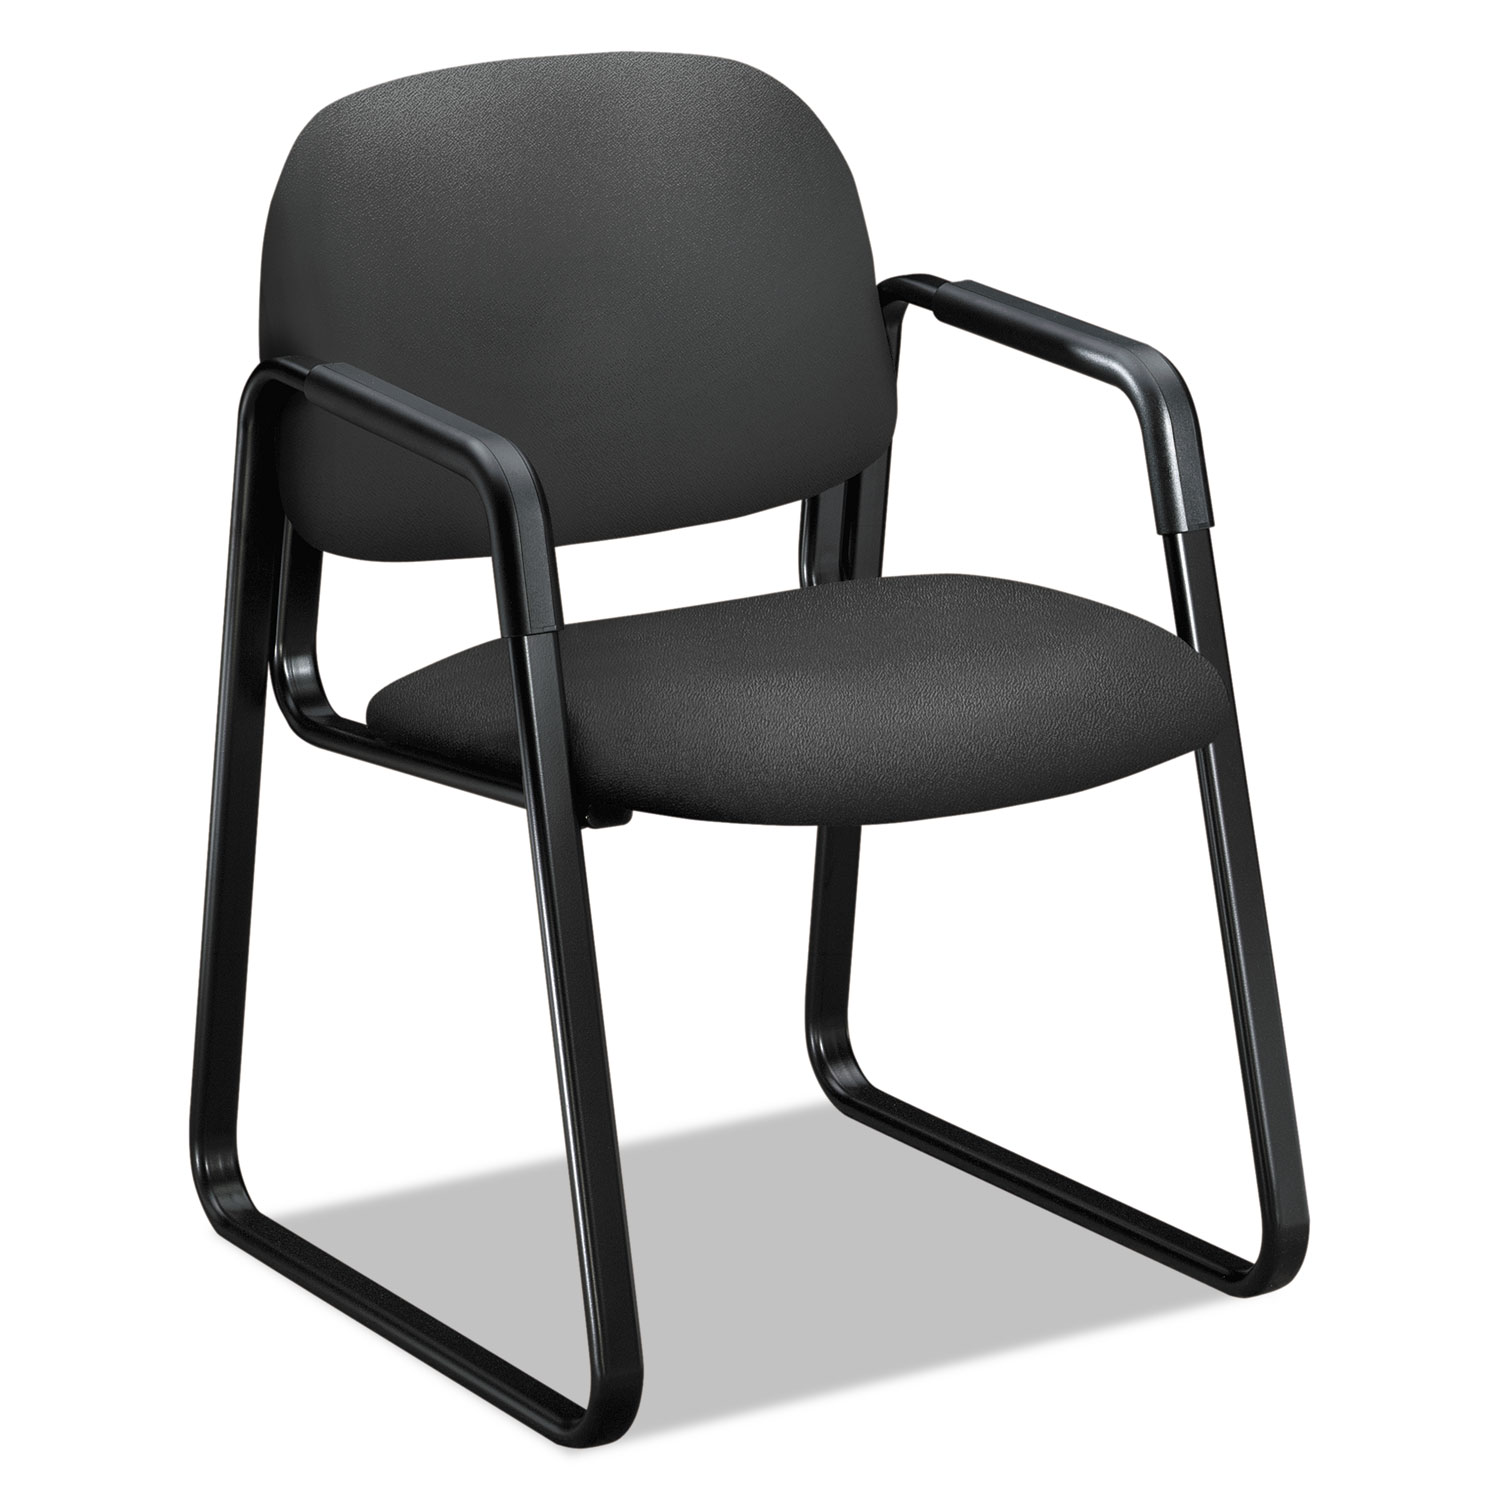  HON H4008.CU19.T Solutions Seating 4000 Series Sled Base Guest Chair, 23.5 x 26 x 33, Iron Ore Seat, Iron Ore Back, Black Base (HON4008CU19T) 